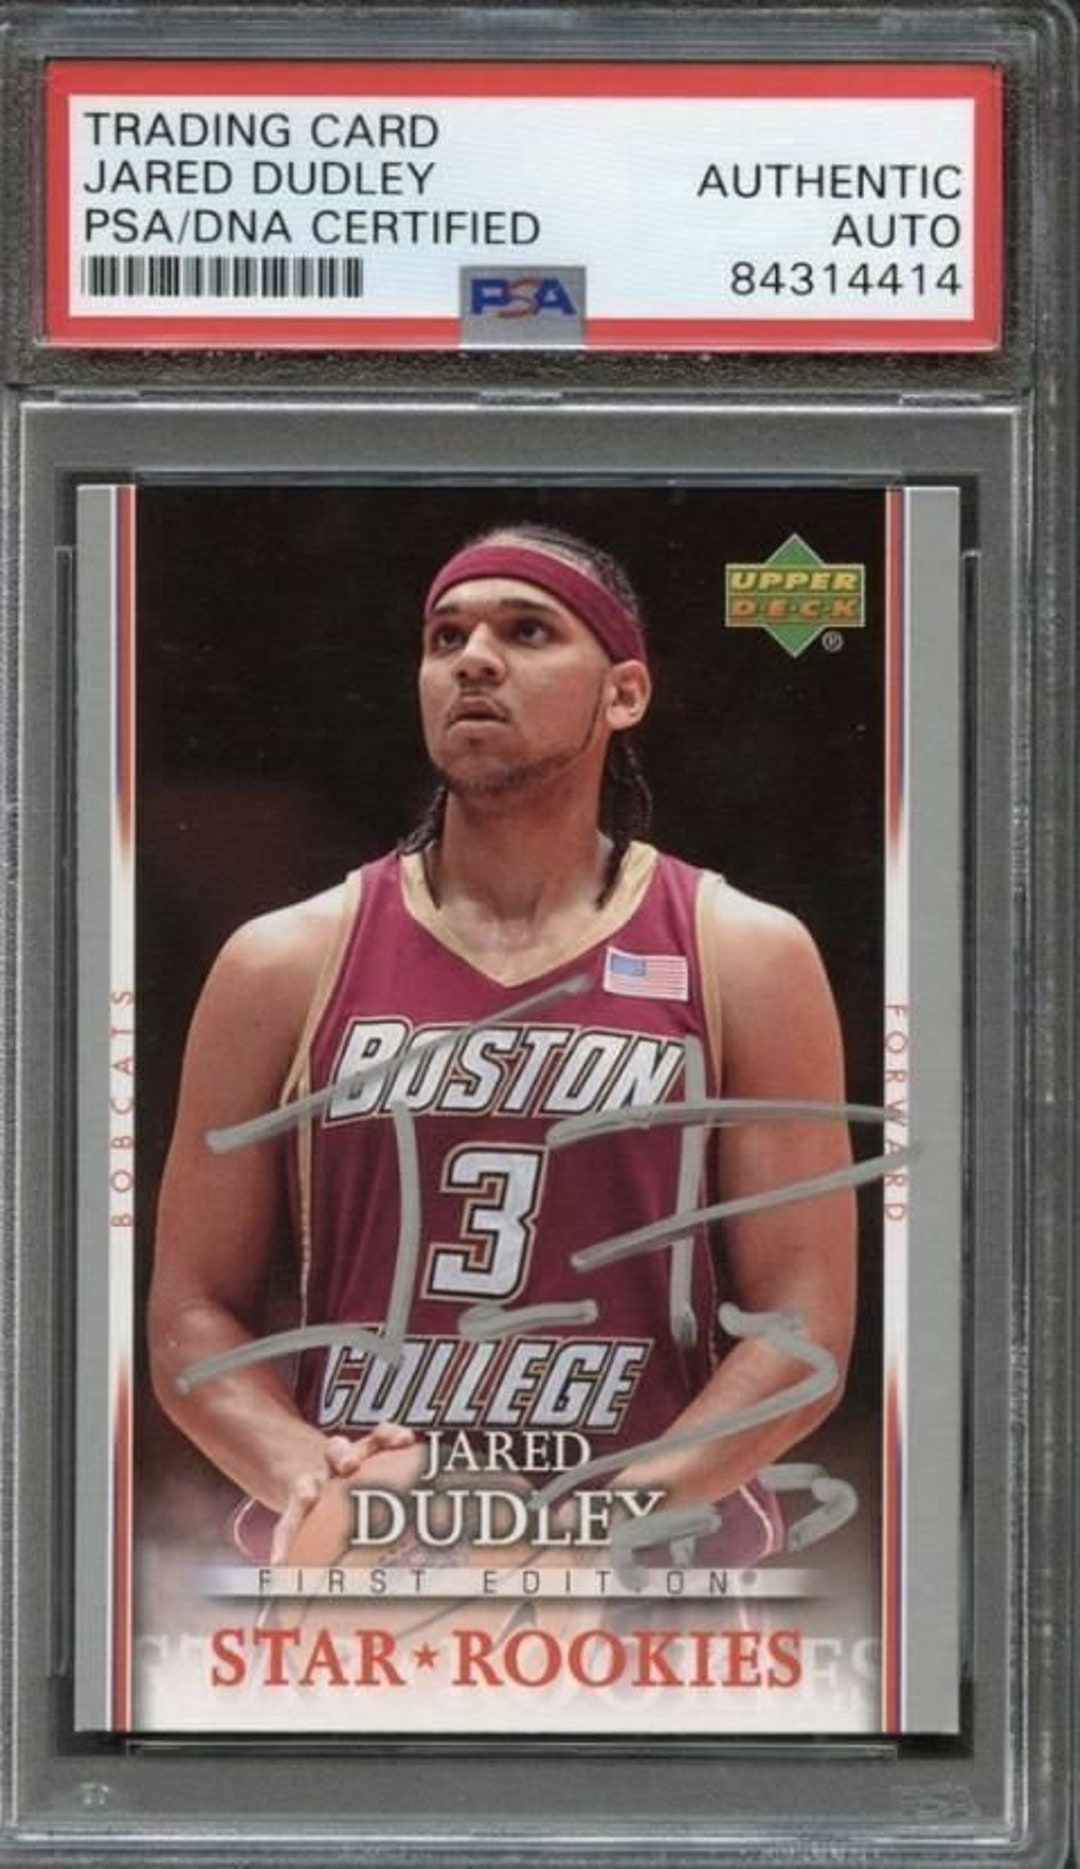 2007 08 Upper Deck First Edition #222 Jared Dudley Signed Card Auto Psa  Slabbed